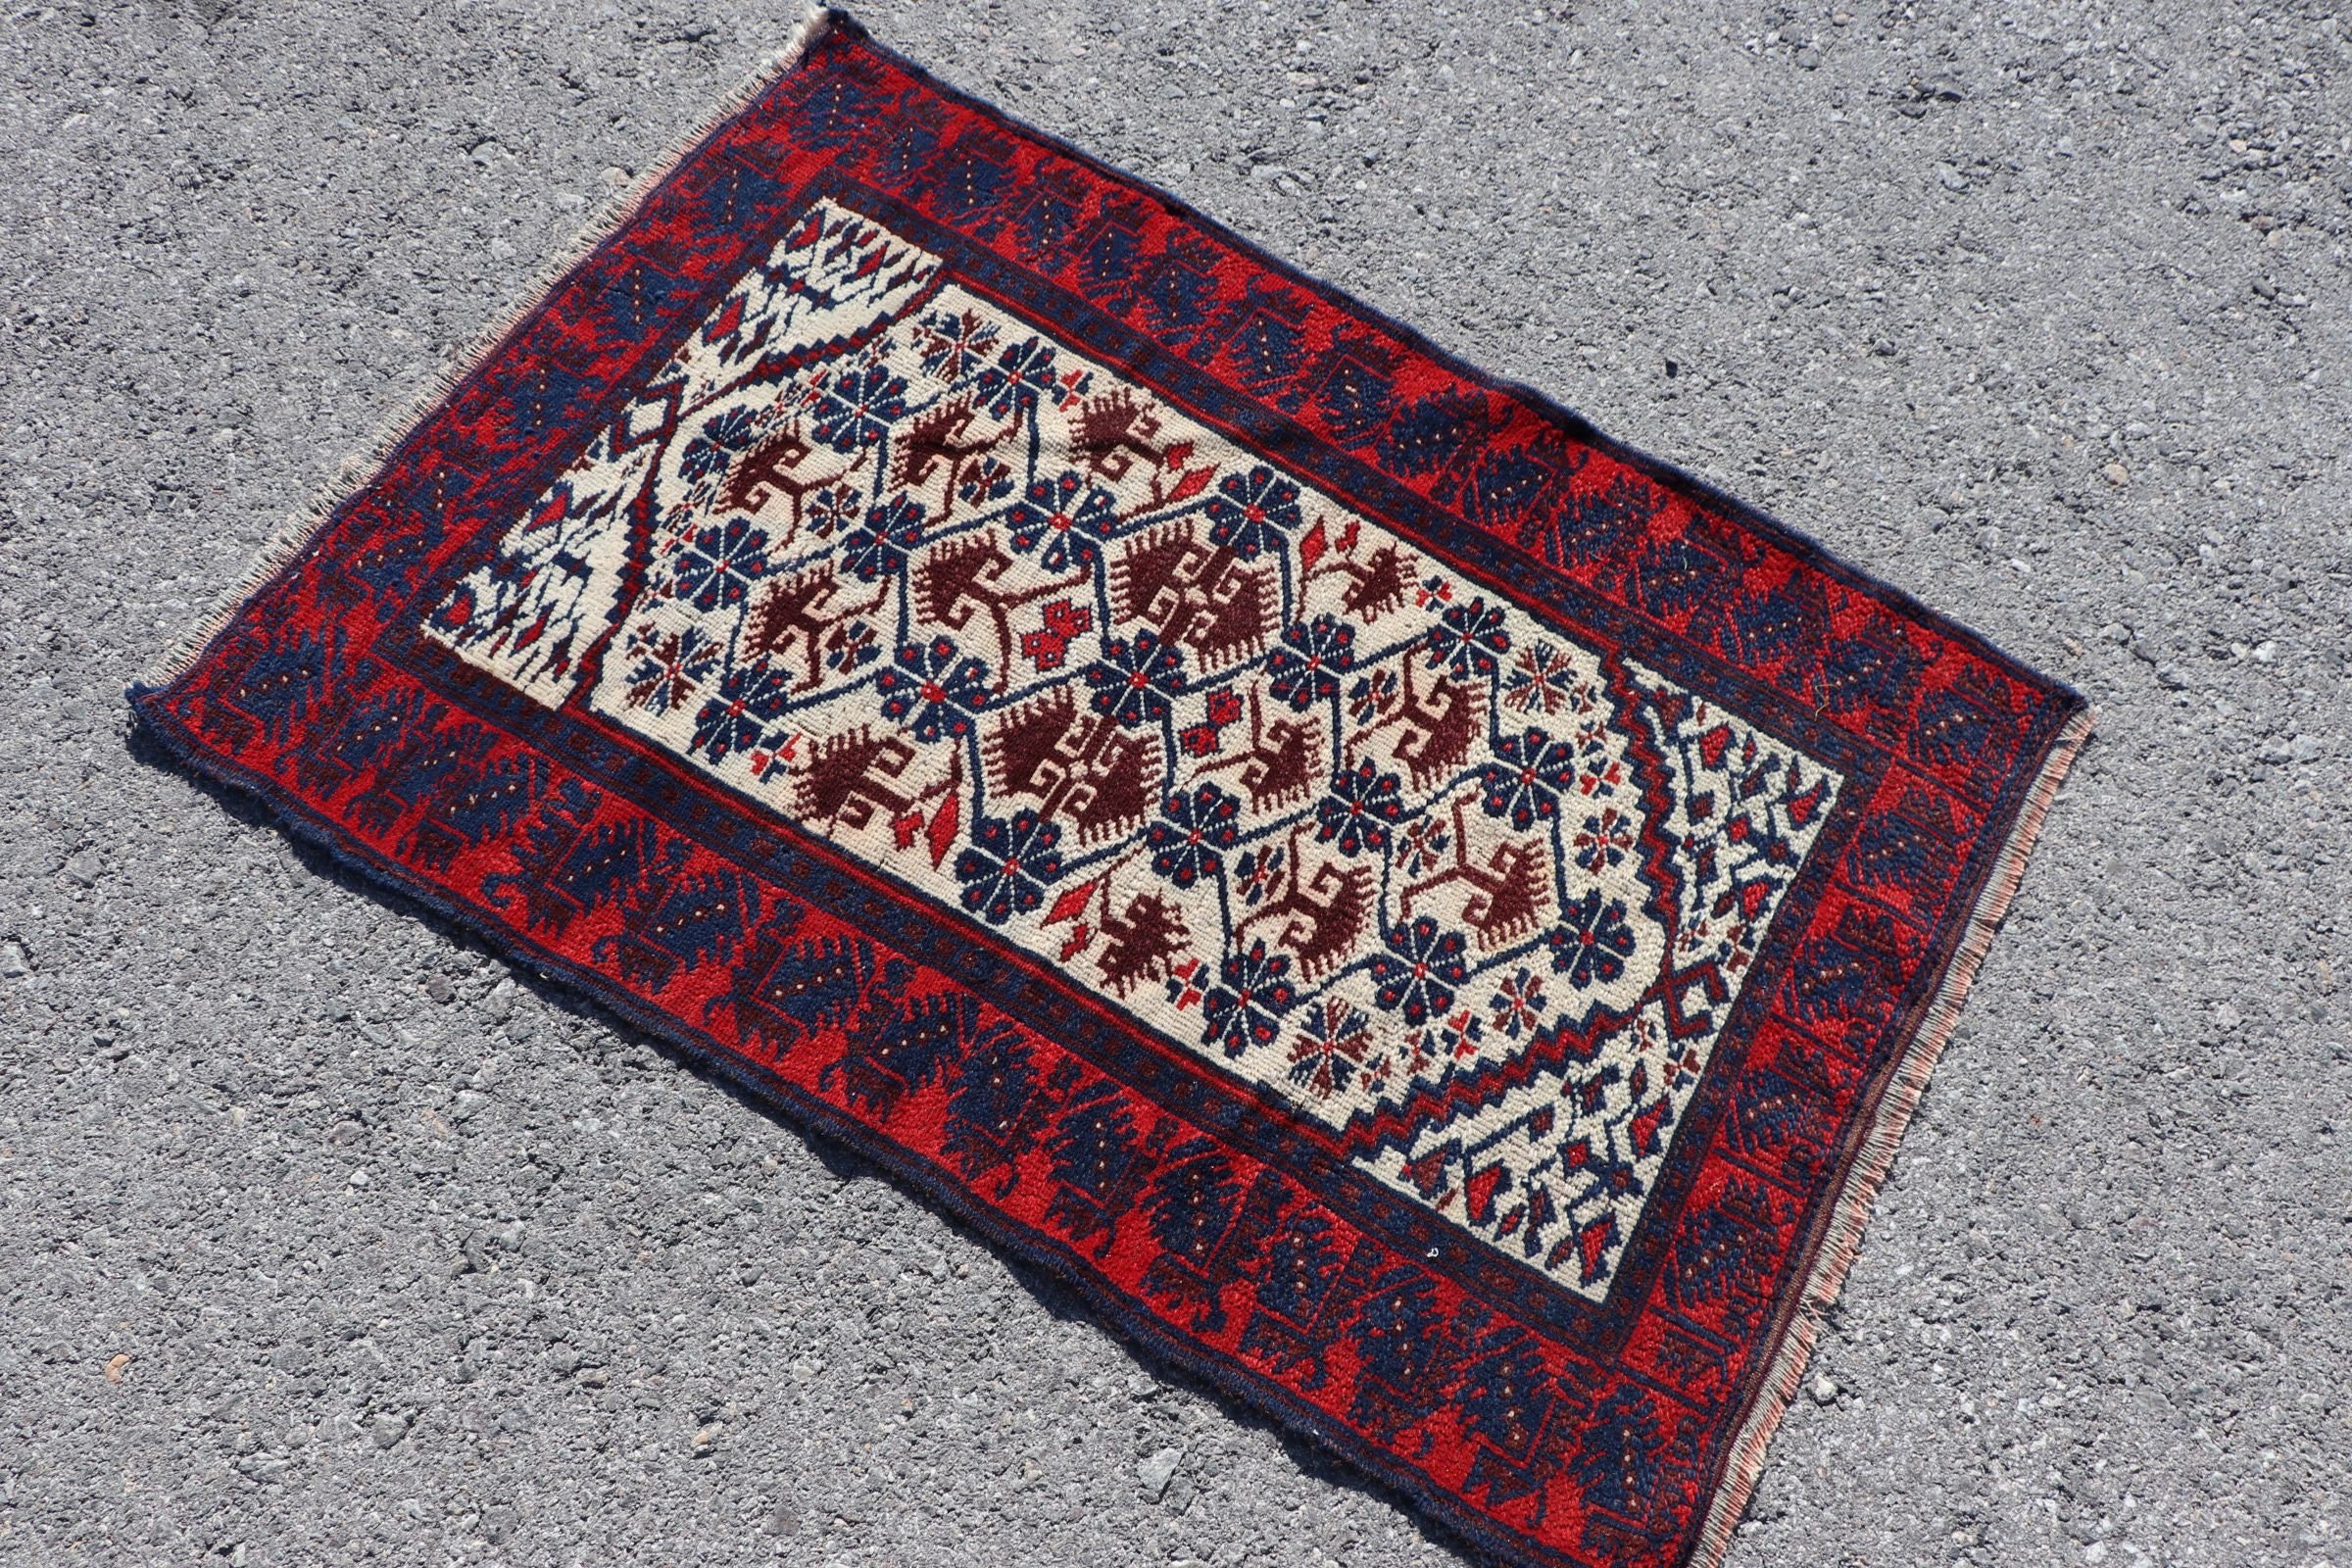 Turkish Rug, Rugs for Entry, Vintage Rug, Moroccan Rug, Kitchen Rug, Entry Rug, Oriental Rug, Red  2.5x3.6 ft Small Rug